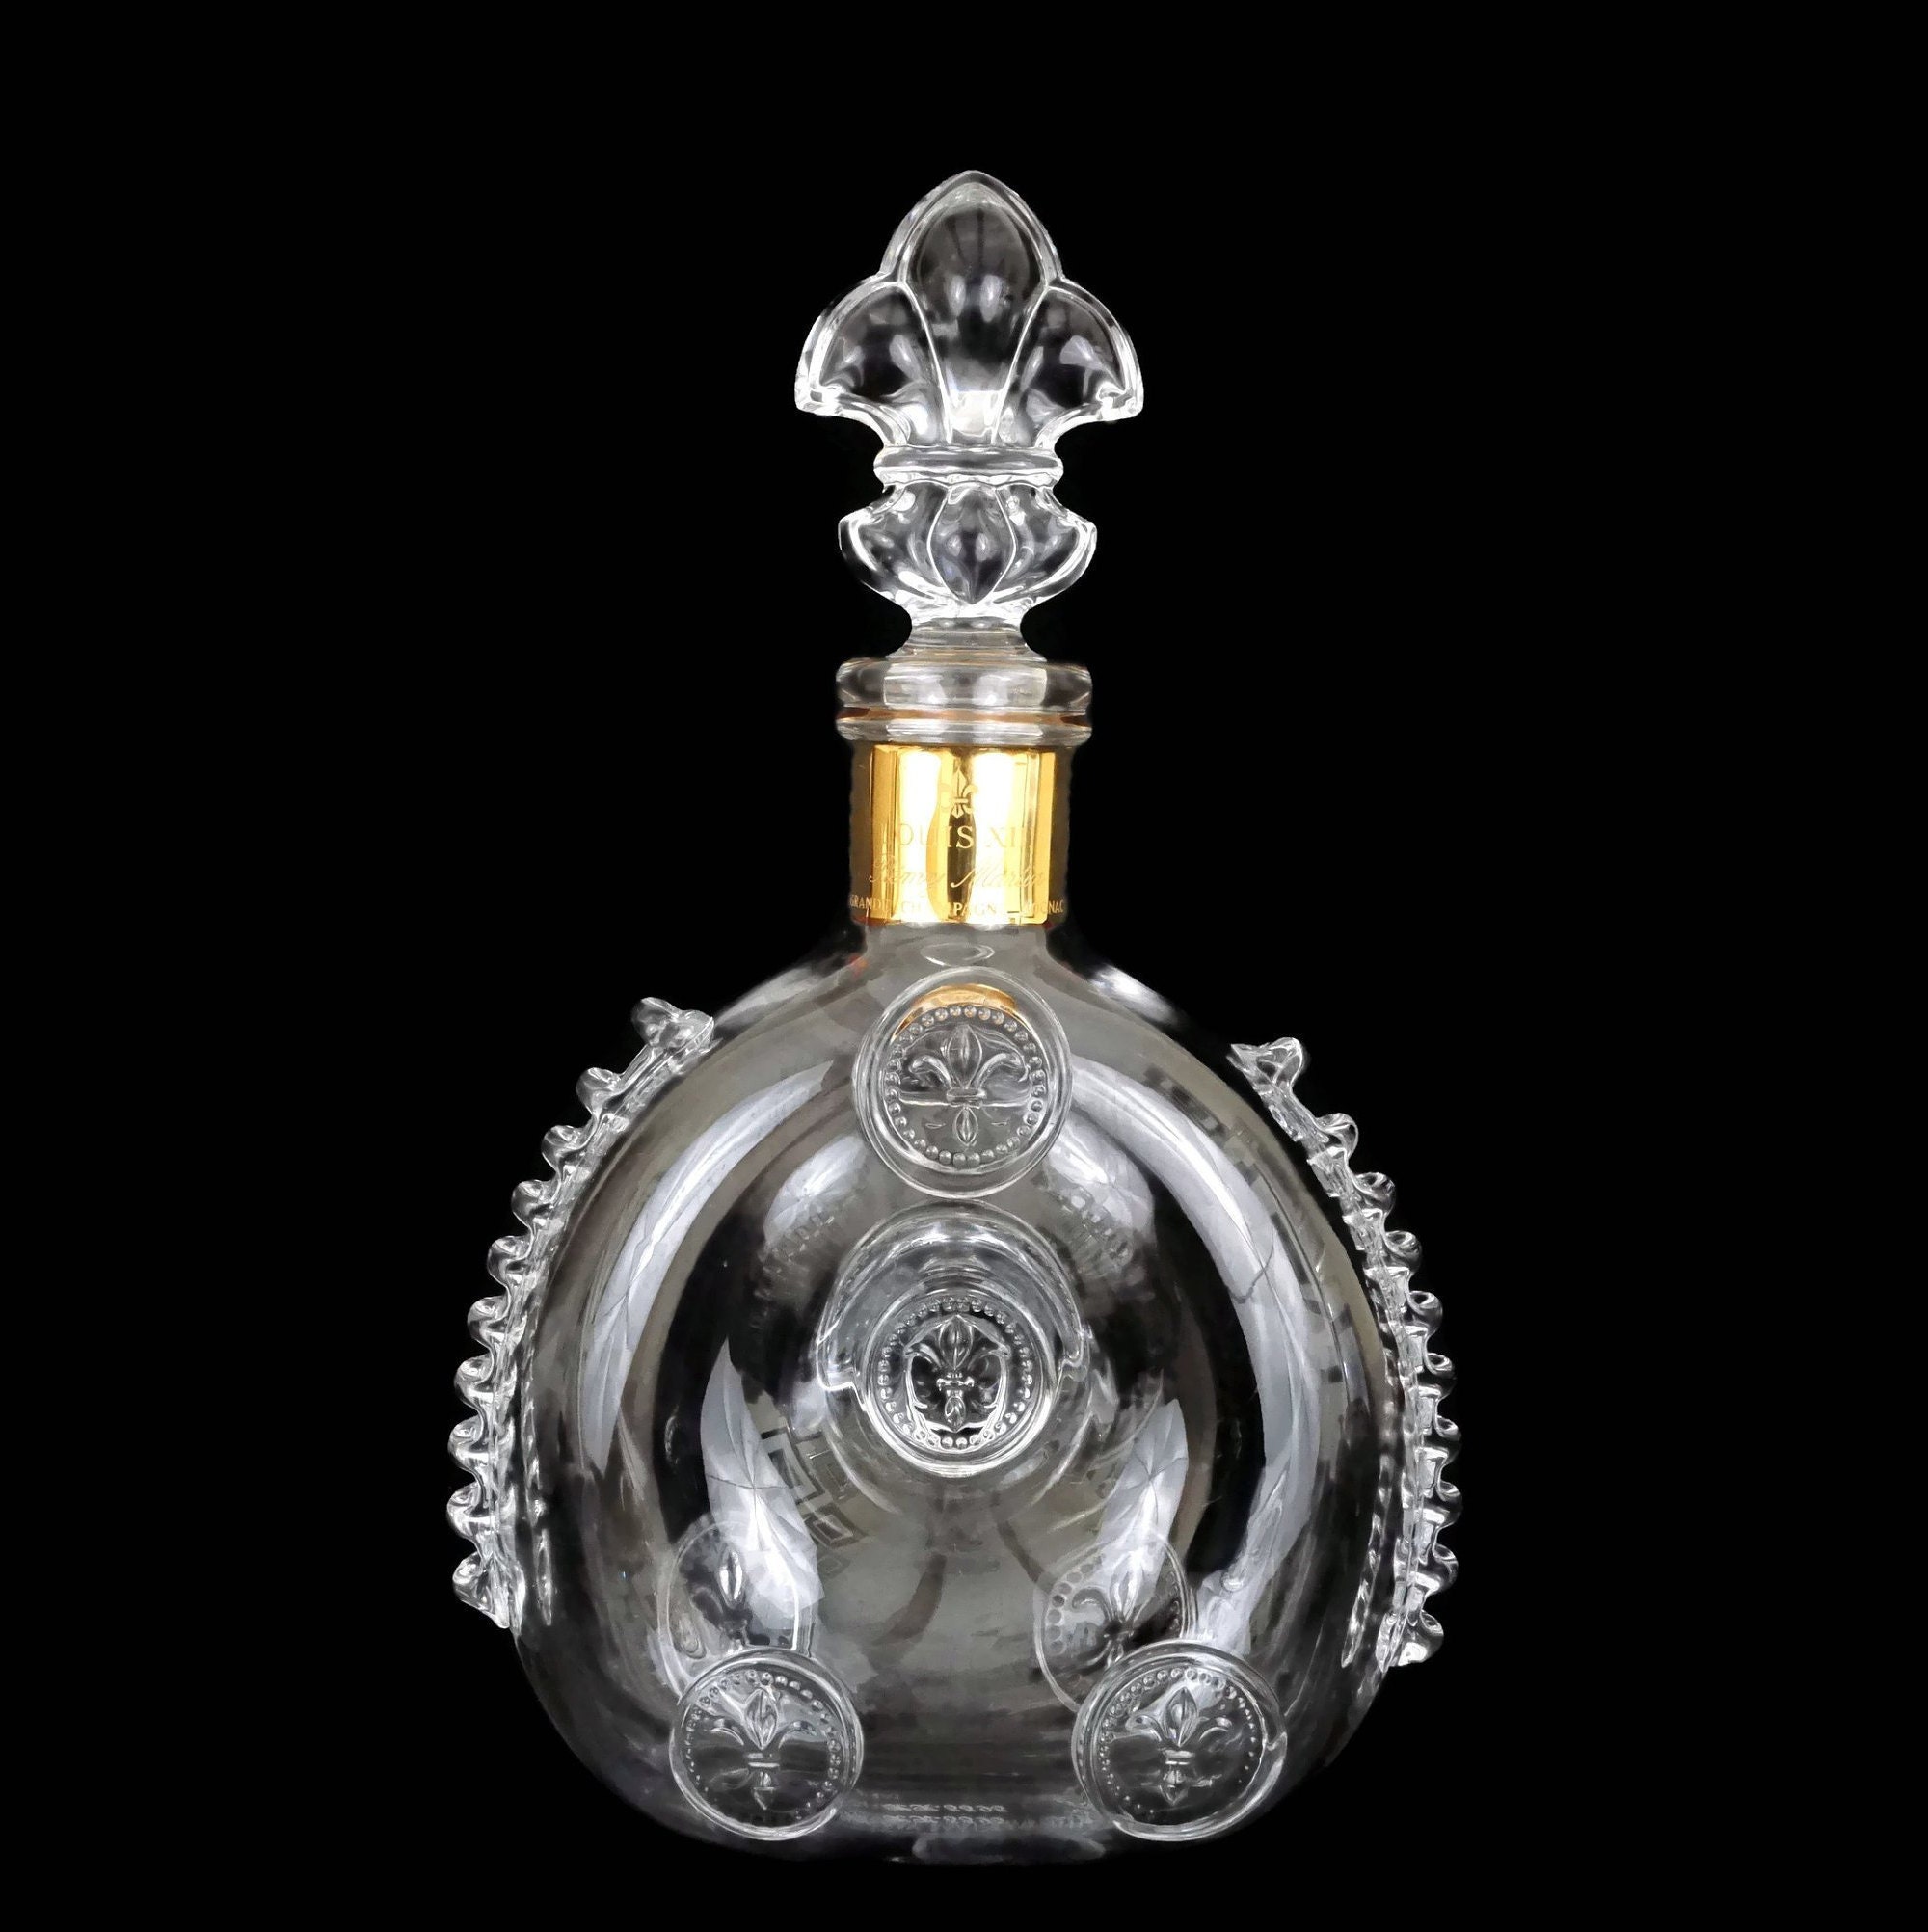 Baccarat Crystal Cognac Decanter for Remy Martin Louis XIII, Vintage French  Bottle with Fleur de Lys Stopper, Collectible Glass & Bar Decor